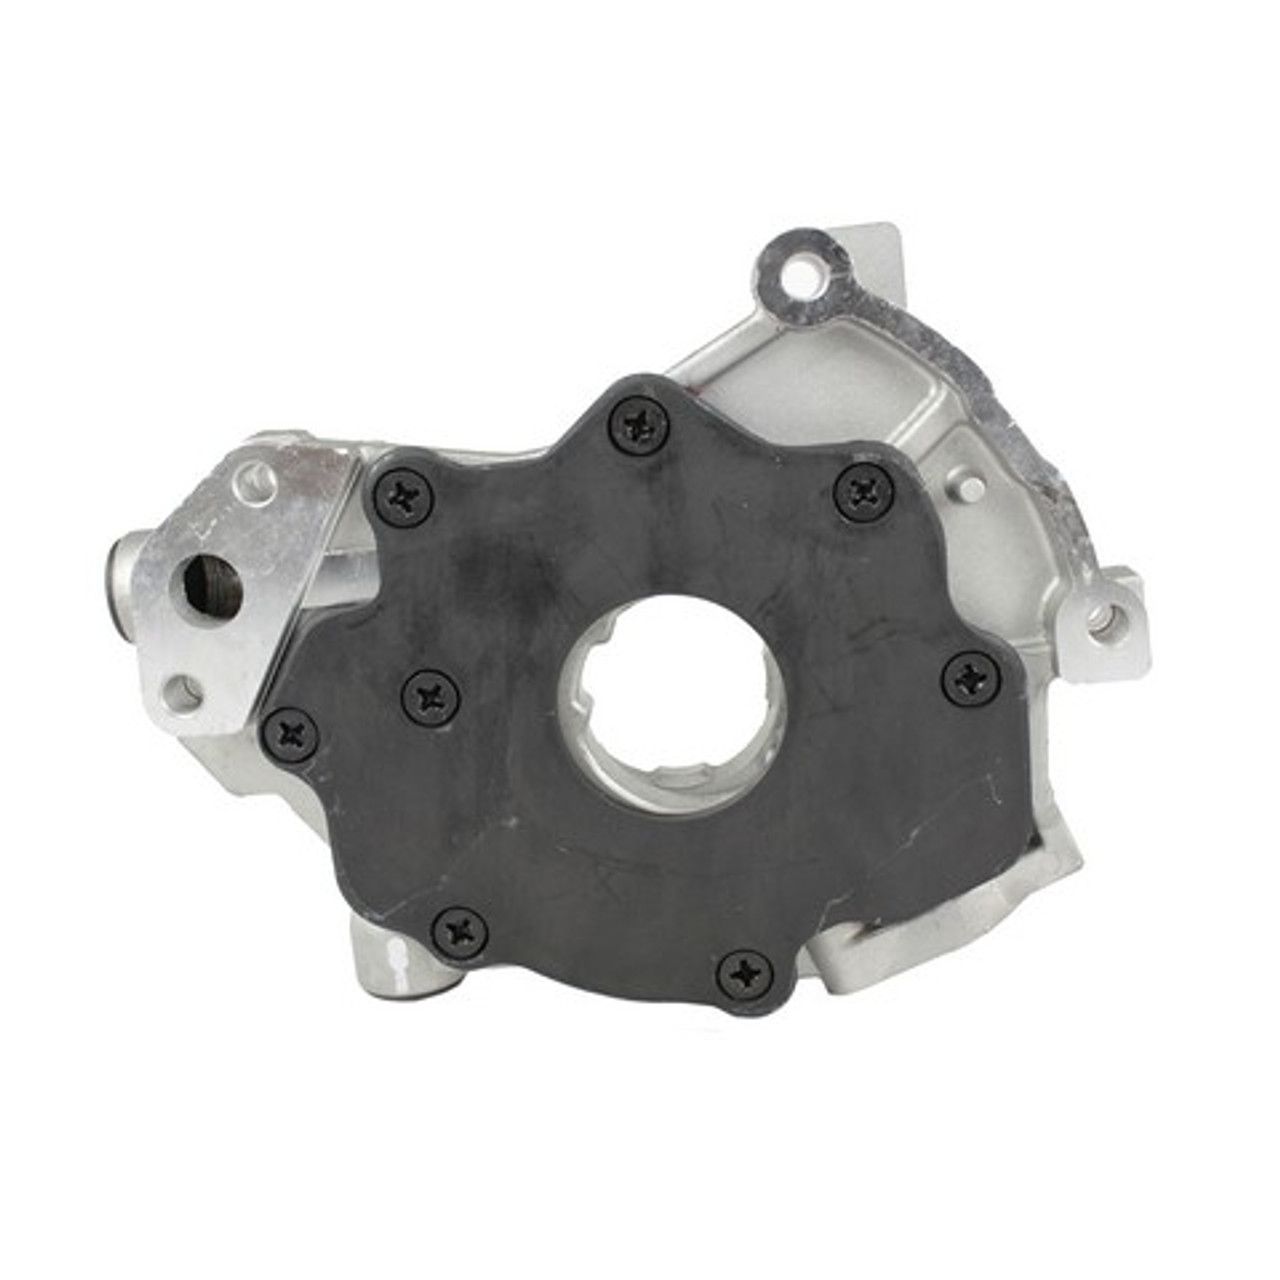 Oil Pump 5.4L 2003 Ford Expedition - OP4131.195